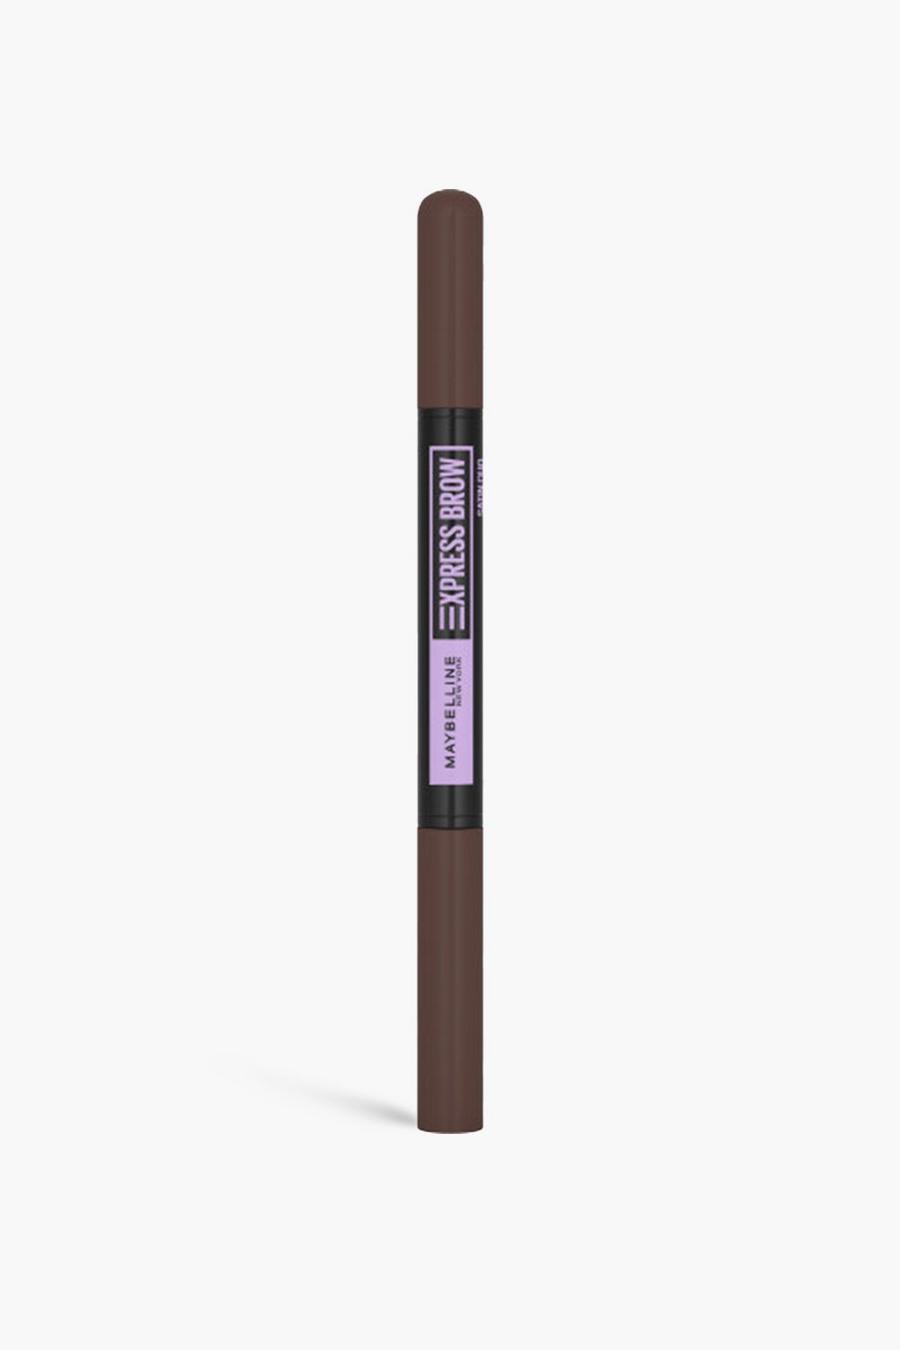 04 dark brown Maybelline Express Brow Duo